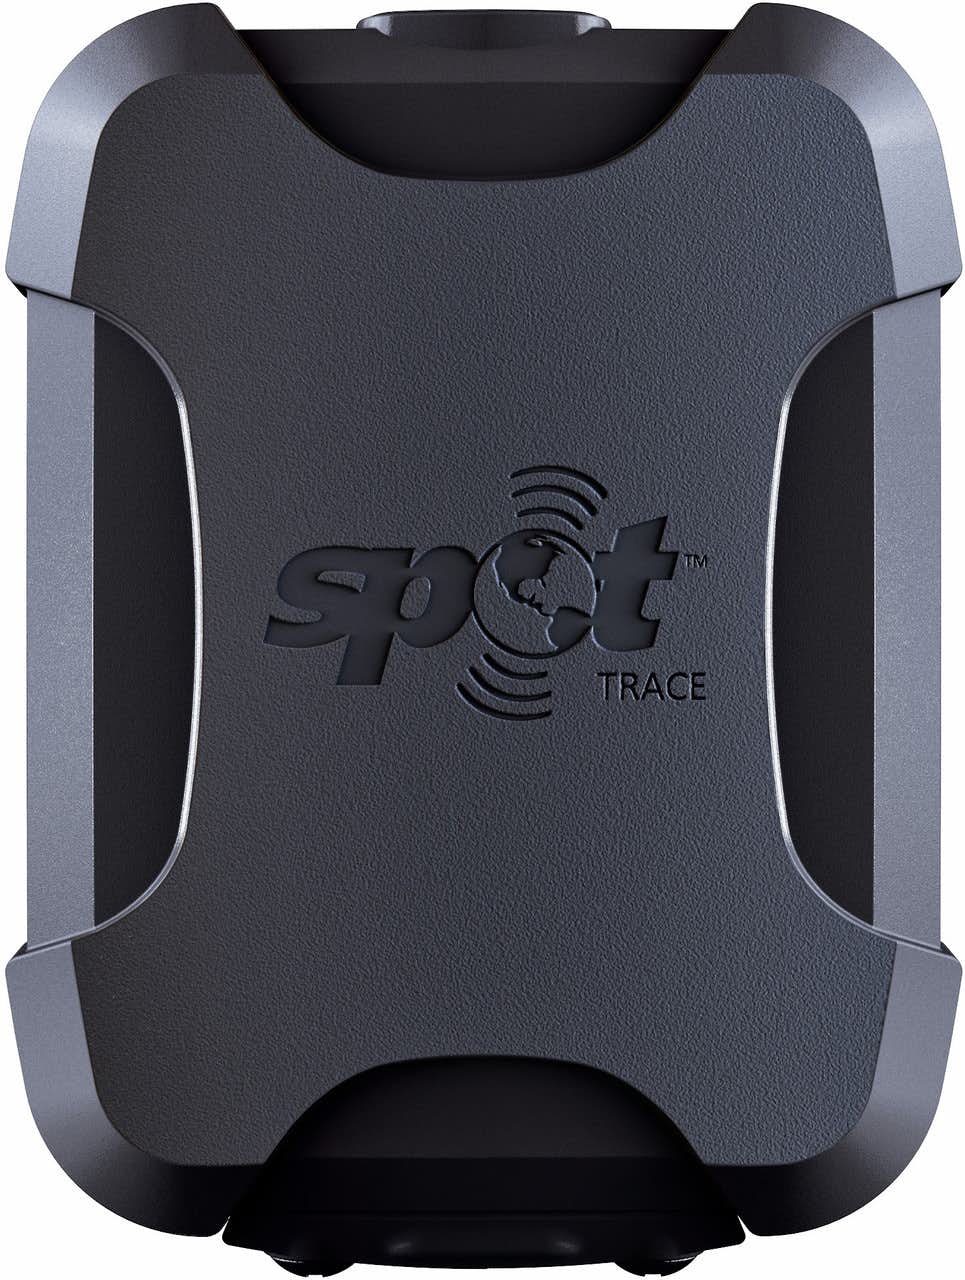 Trace Anti-Theft Tracking Device Black/Grey